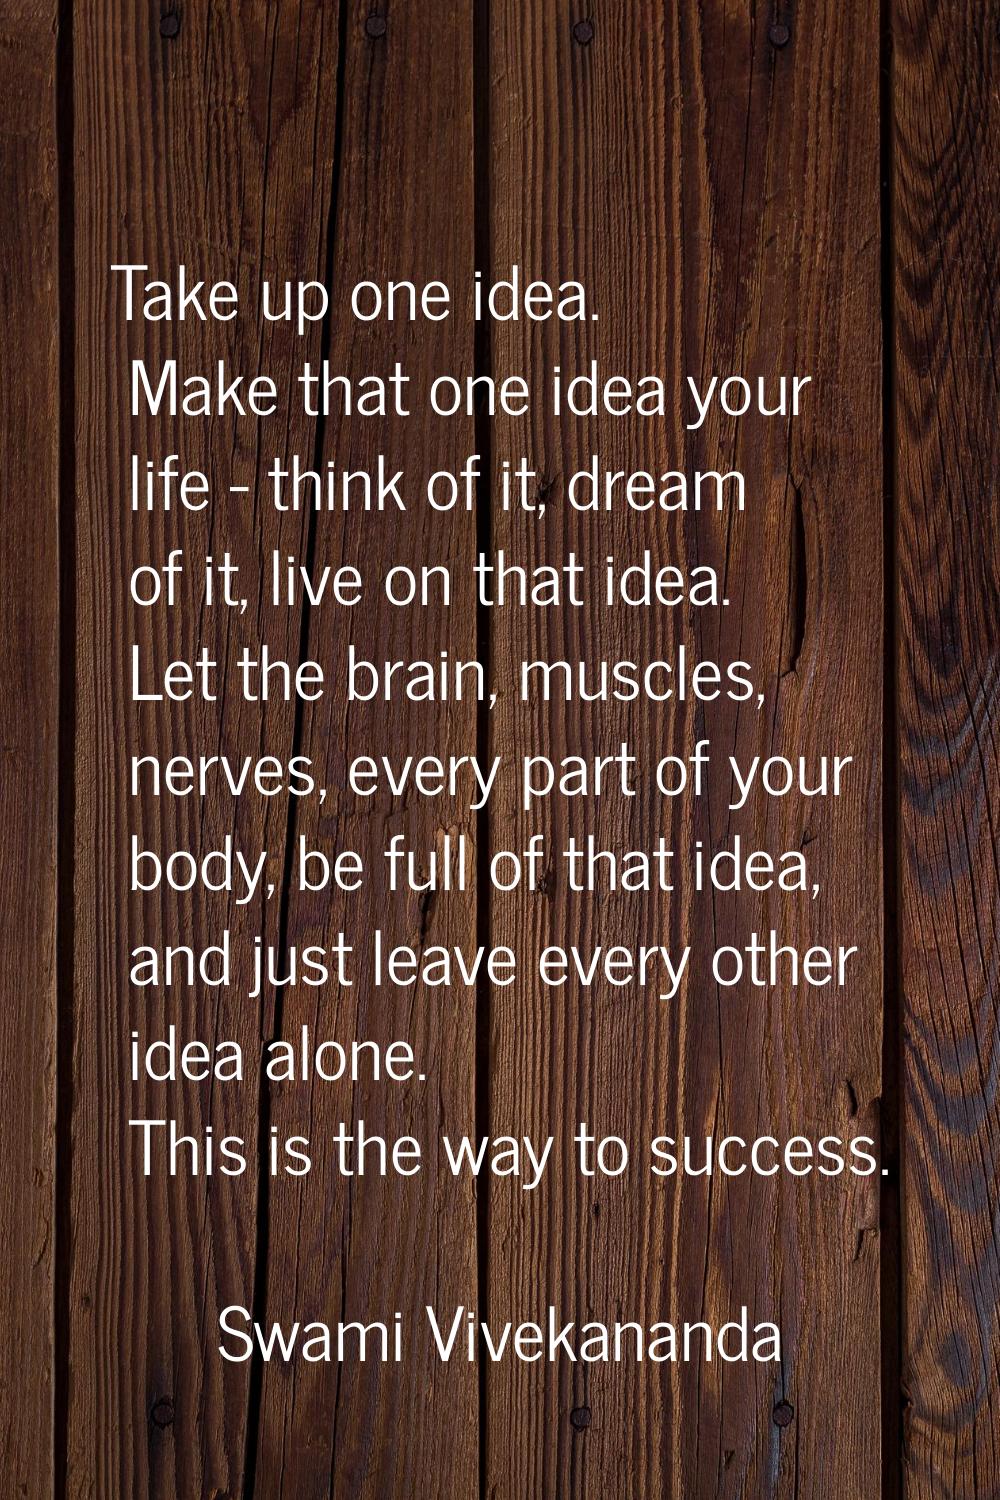 Take up one idea. Make that one idea your life - think of it, dream of it, live on that idea. Let t